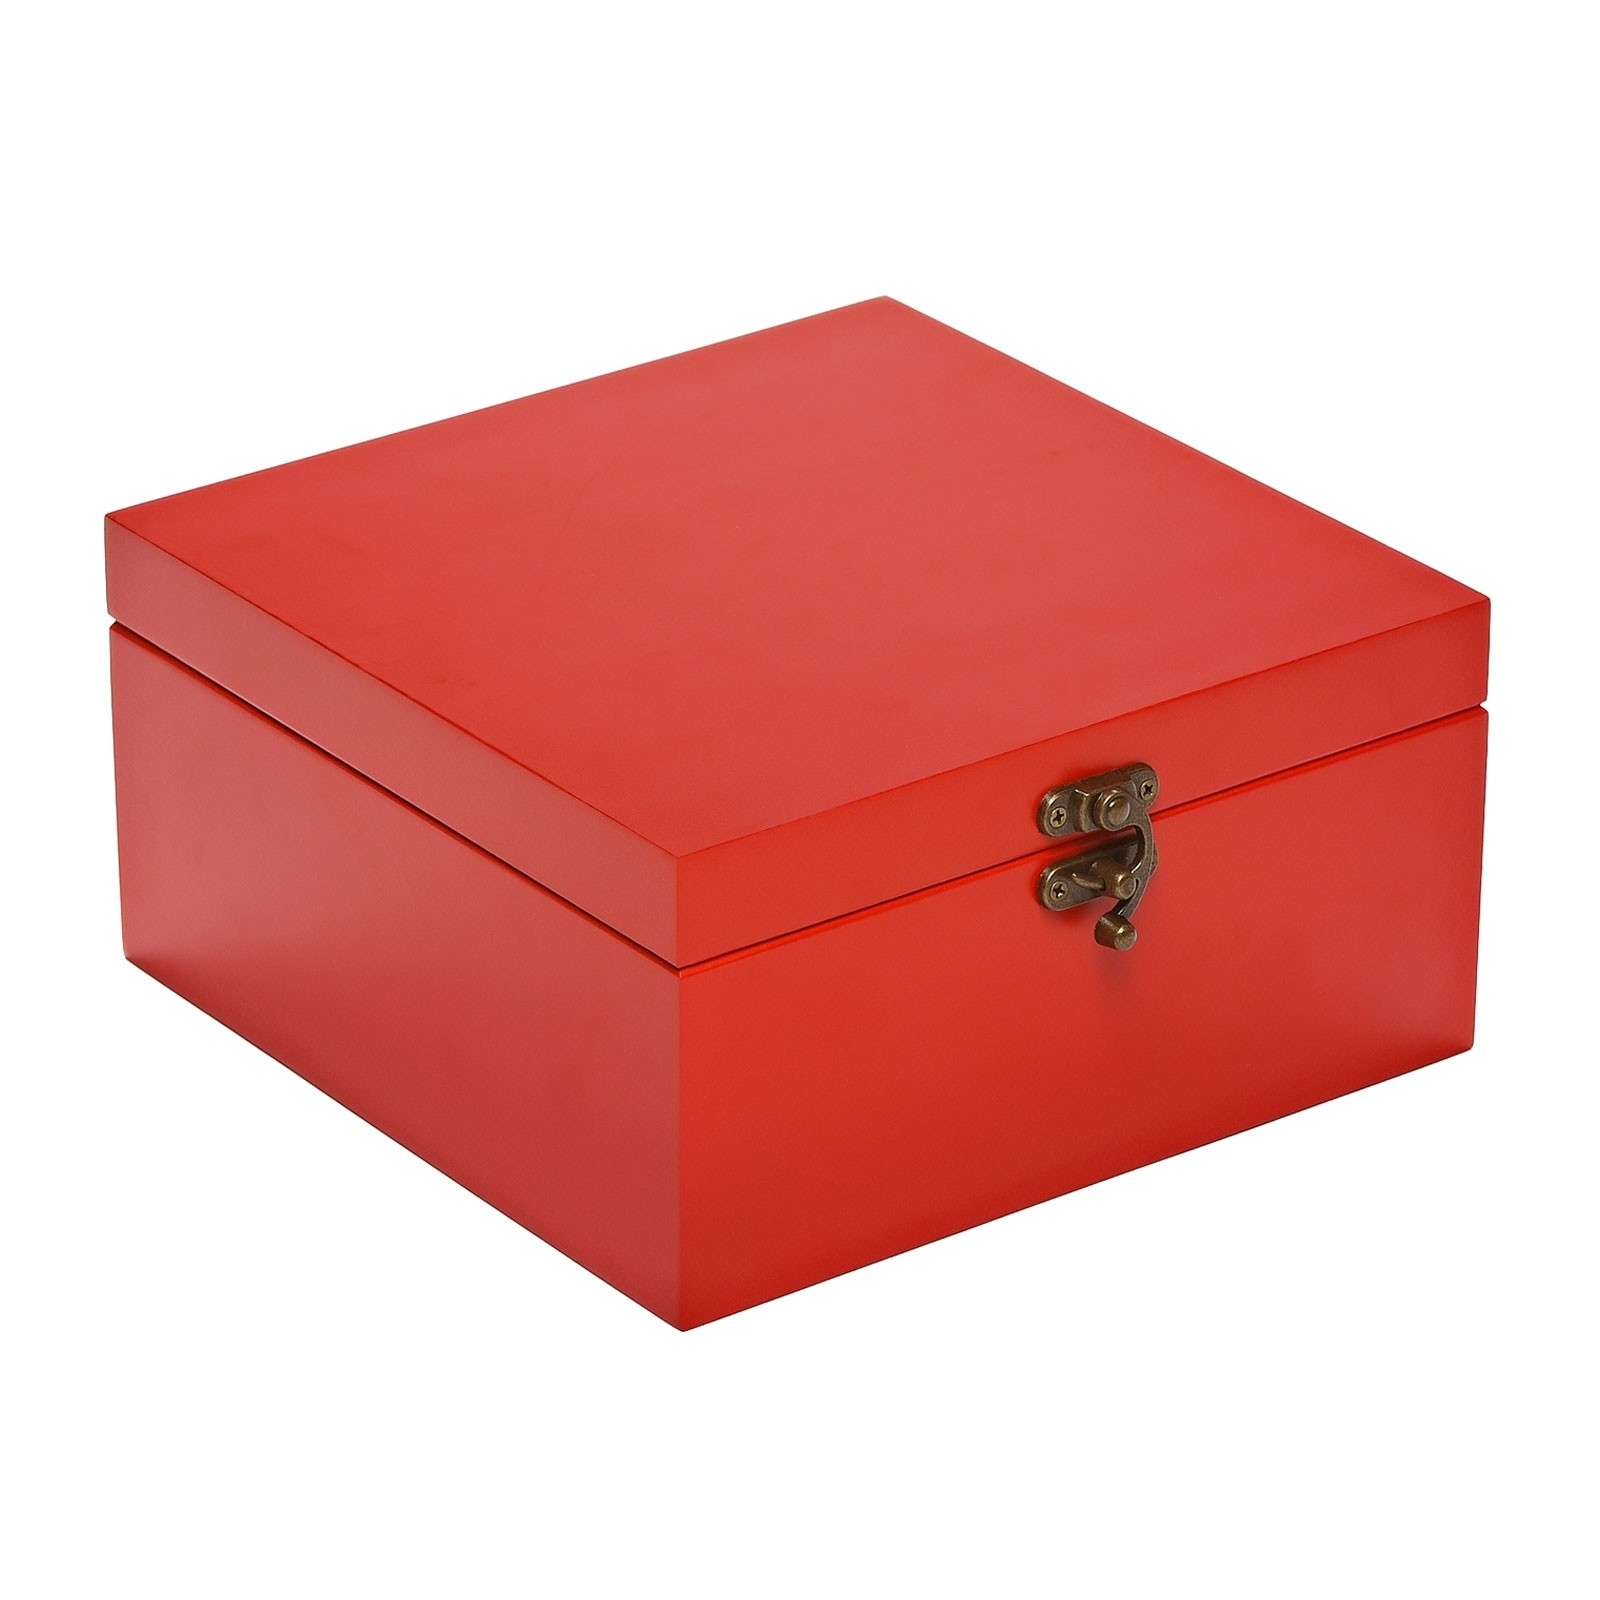 red & white painted boxes & gifts